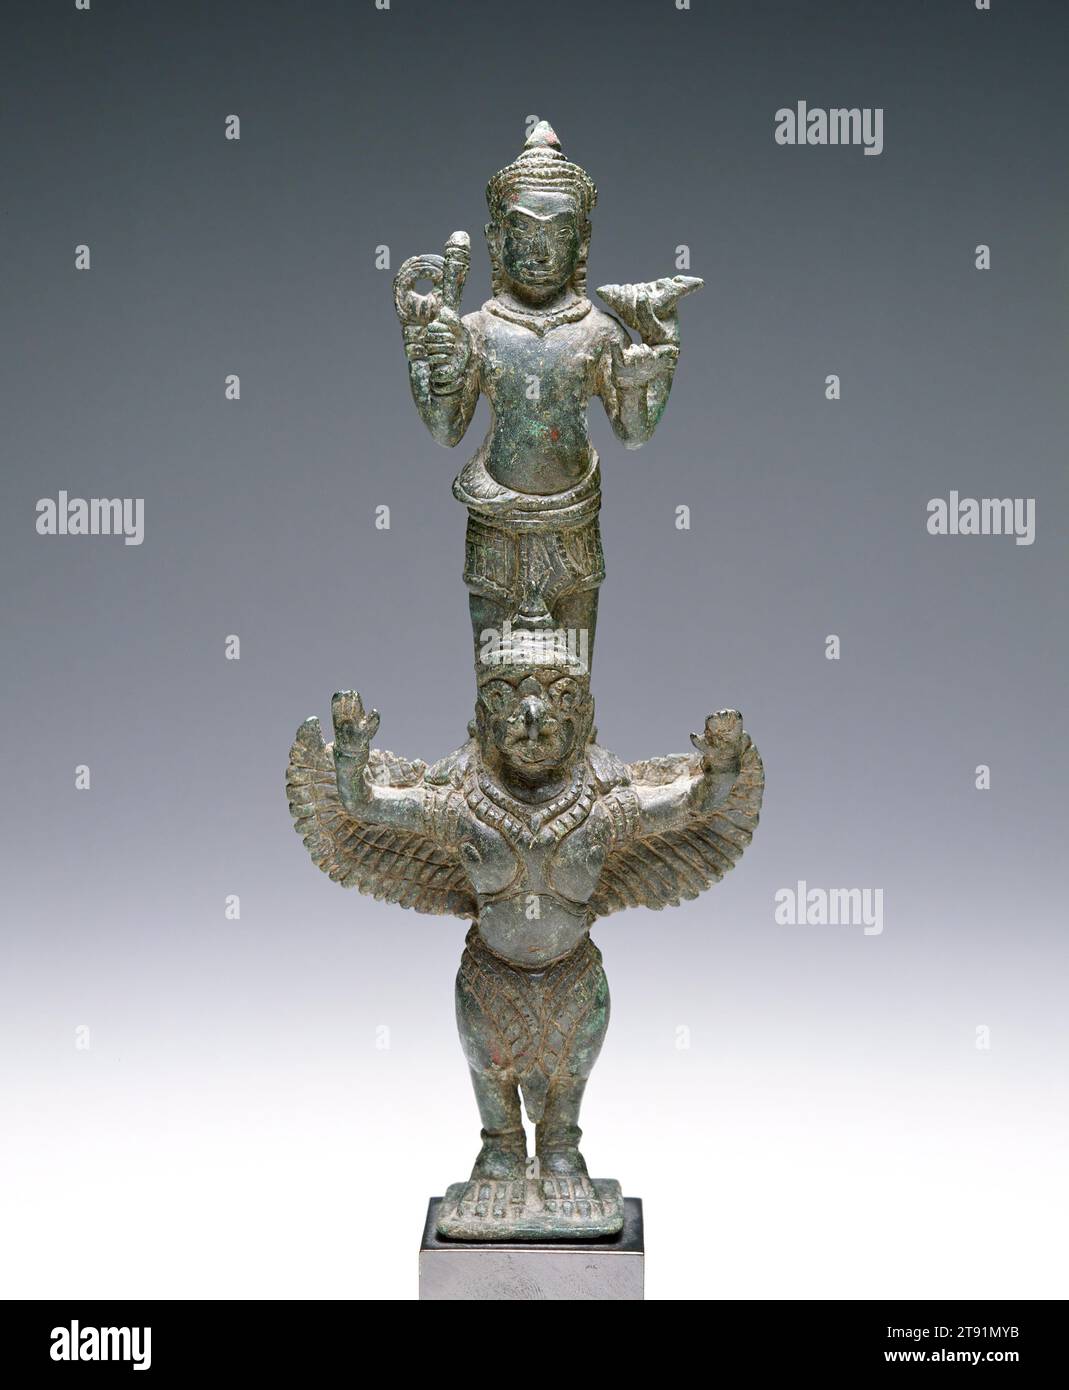 Vishnu on Garuda, 12th-13th century, 7 1/8 x 3 1/8 x 1 7/16 in. (18.1 x 7.94 x 3.65 cm), Bronze, Cambodia, 12th-13th century, In Hinduism, Vishnu is the preserver and maintainer of the established order. Whereas Shiva is Lord of the Beginning and of the End, Vishnu is the deity who oversees the middle ground, avoids extremes, and maintains orthodoxy. The standard depiction of Vishnu is four-armed standing upright wearing a crown. He carries a conch shell, lotus, a club, and a discus. His vehicle is the bird Garuda depicted here in the usual form as part human, part bird Stock Photo